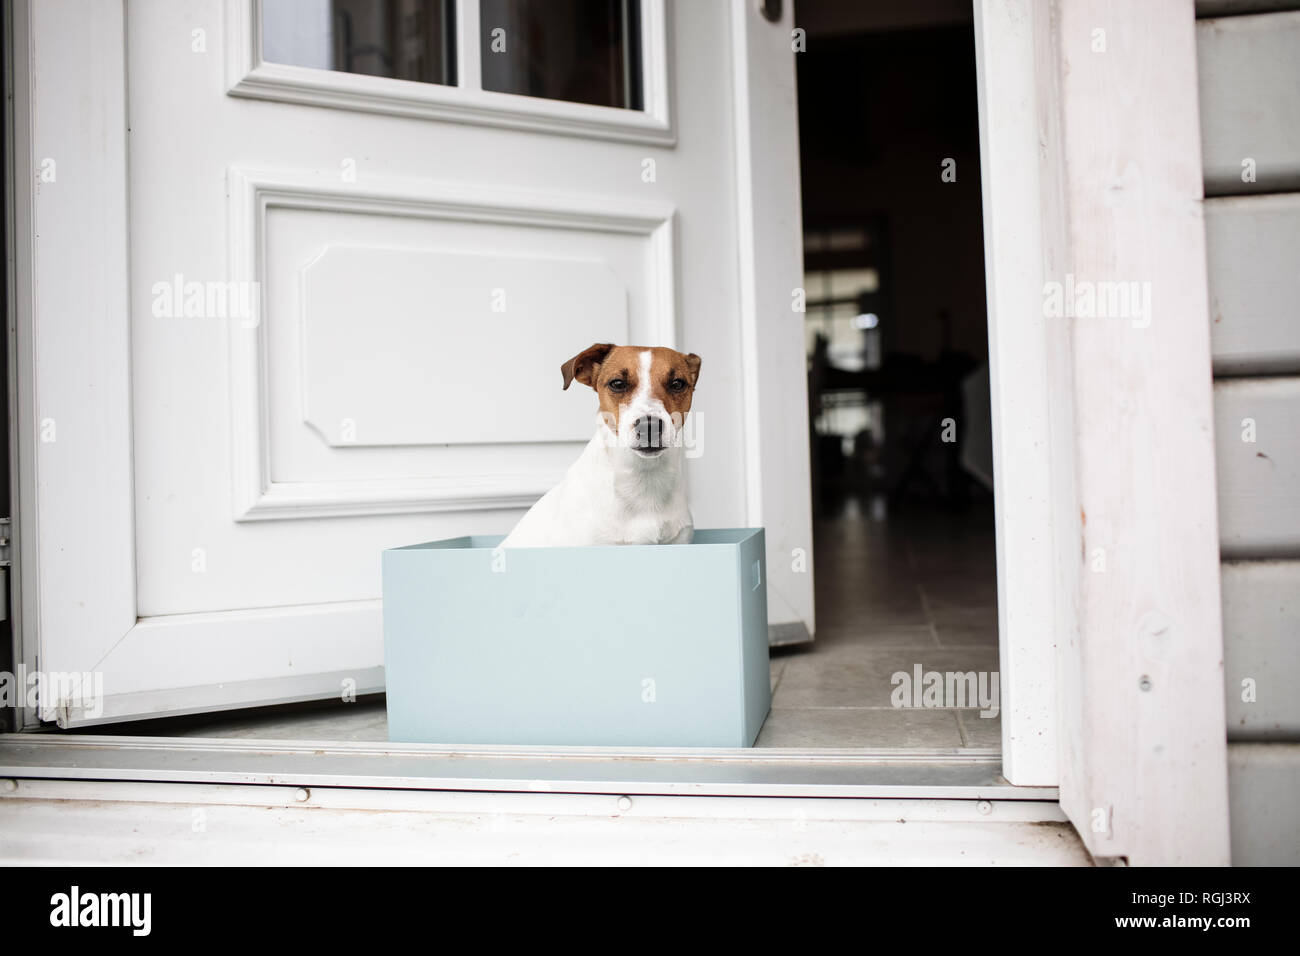 Portrait of Jack Russel Terrier sitting in a cardboard box in front of open house entrance Stock Photo